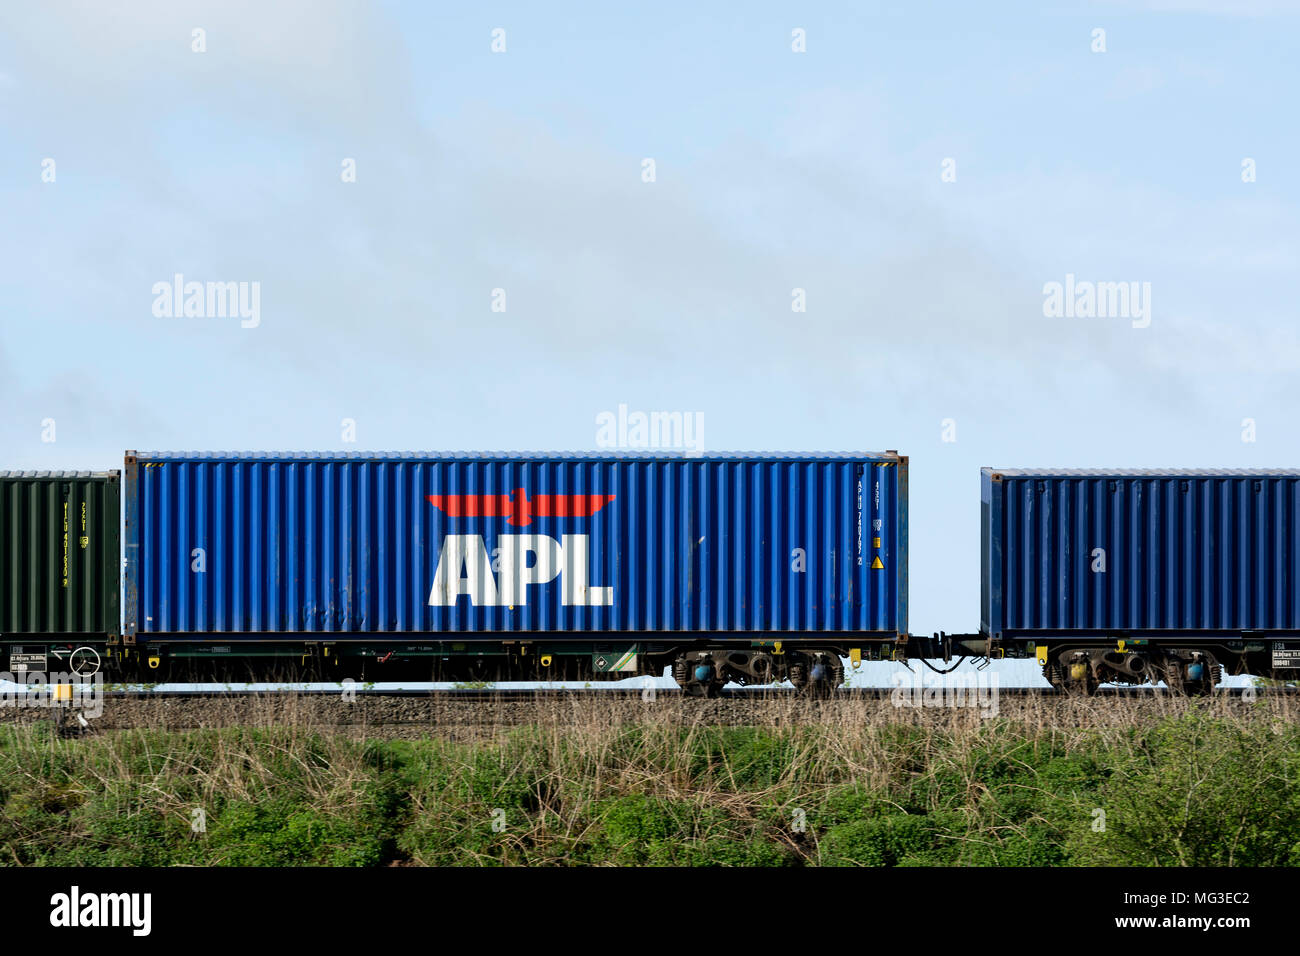 APL shipping container on a freightliner train, Warwickshire, UK Stock Photo